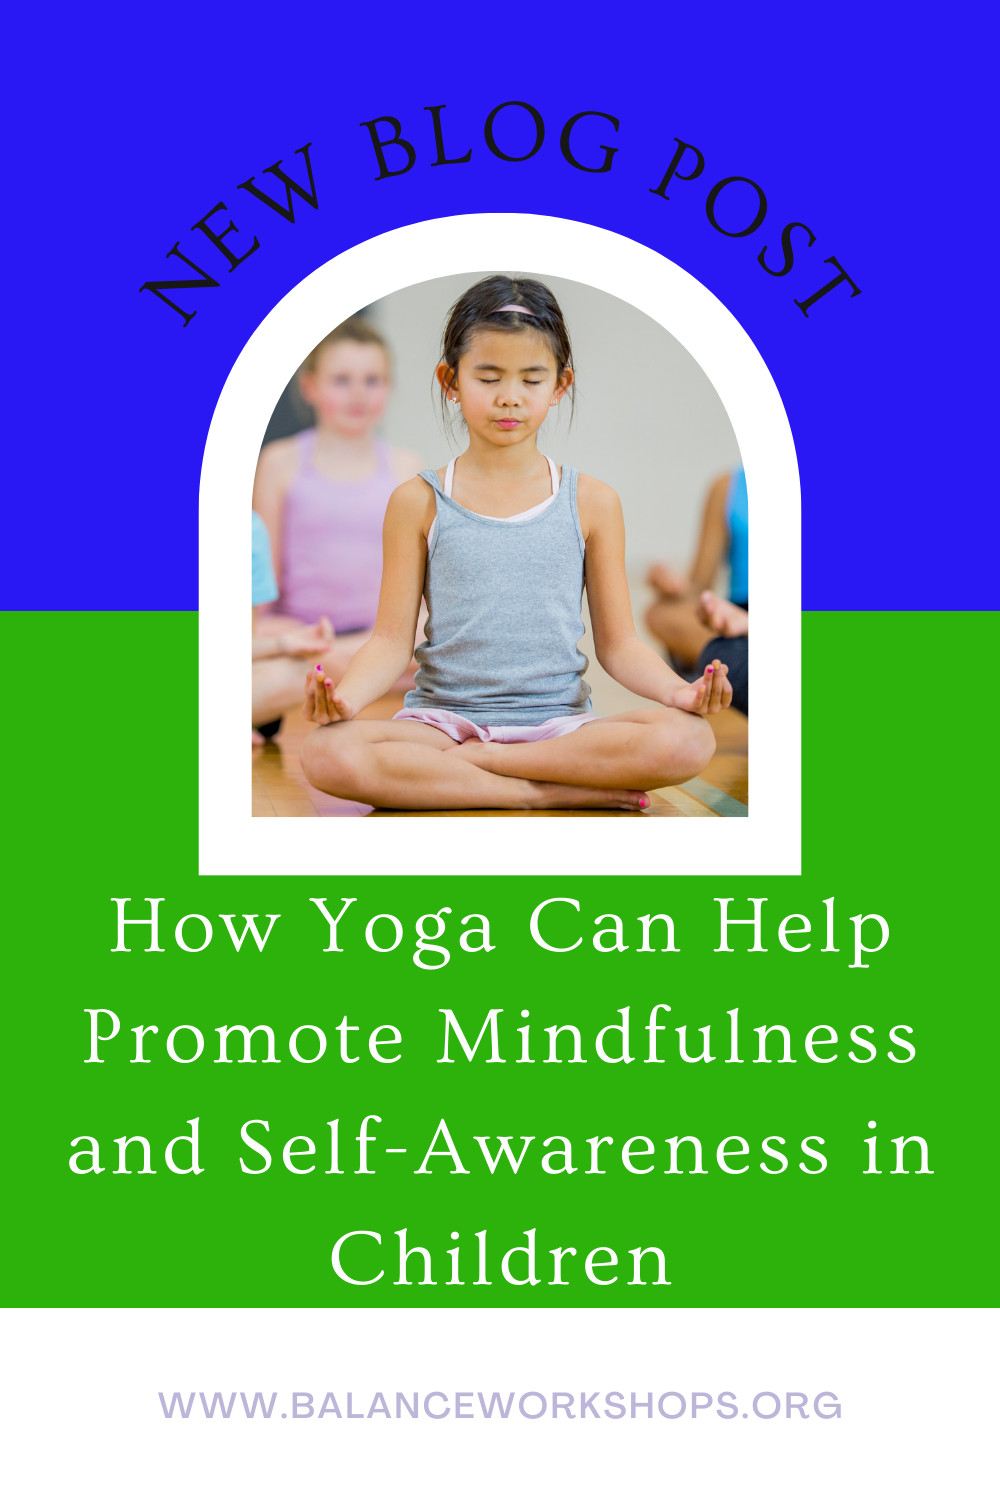 How Yoga Can Help Promote Mindfulness and Self-Awareness in Children